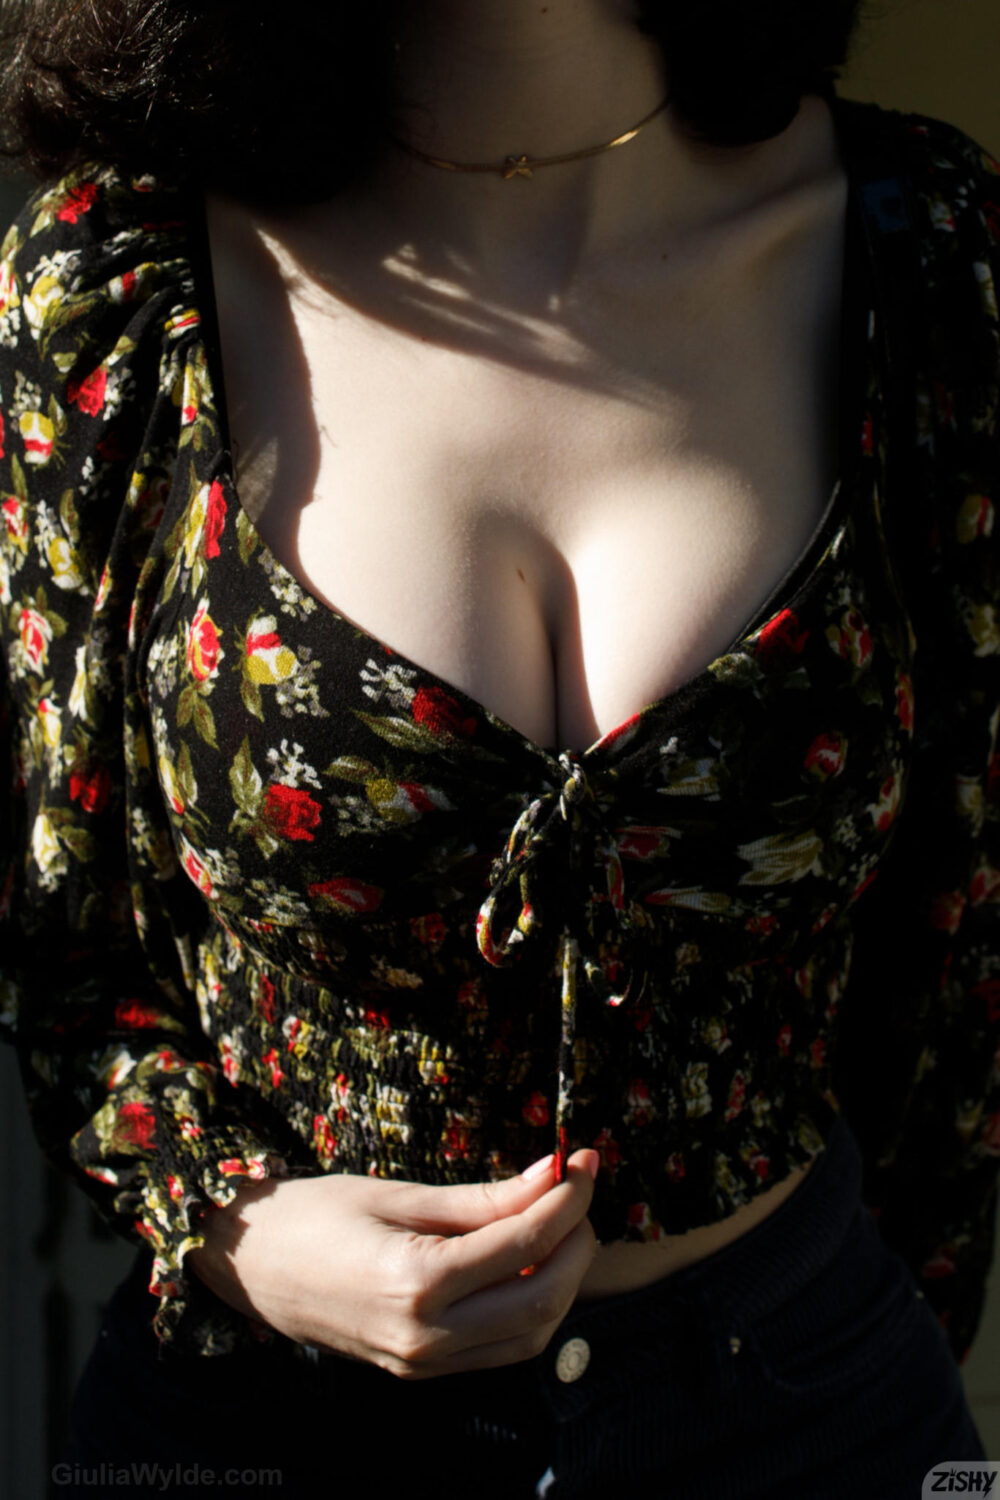 A dark top and pale cleavage... a dangerous contrast